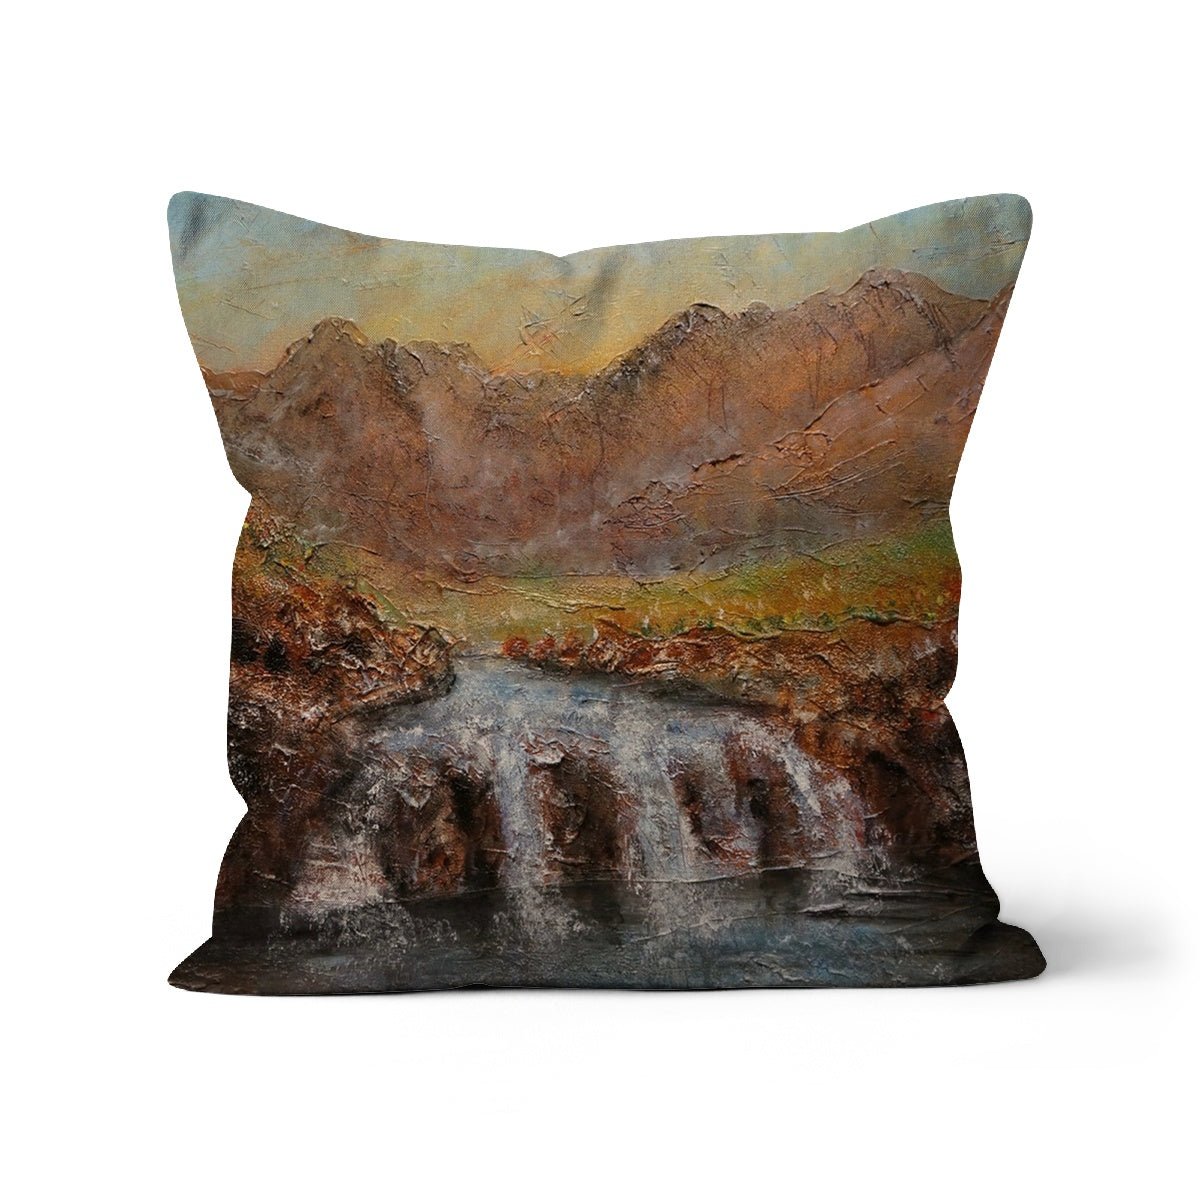 Fairy Pools Dawn Skye Art Gifts Cushion-Cushions-Skye Art Gallery-Faux Suede-16"x16"-Paintings, Prints, Homeware, Art Gifts From Scotland By Scottish Artist Kevin Hunter